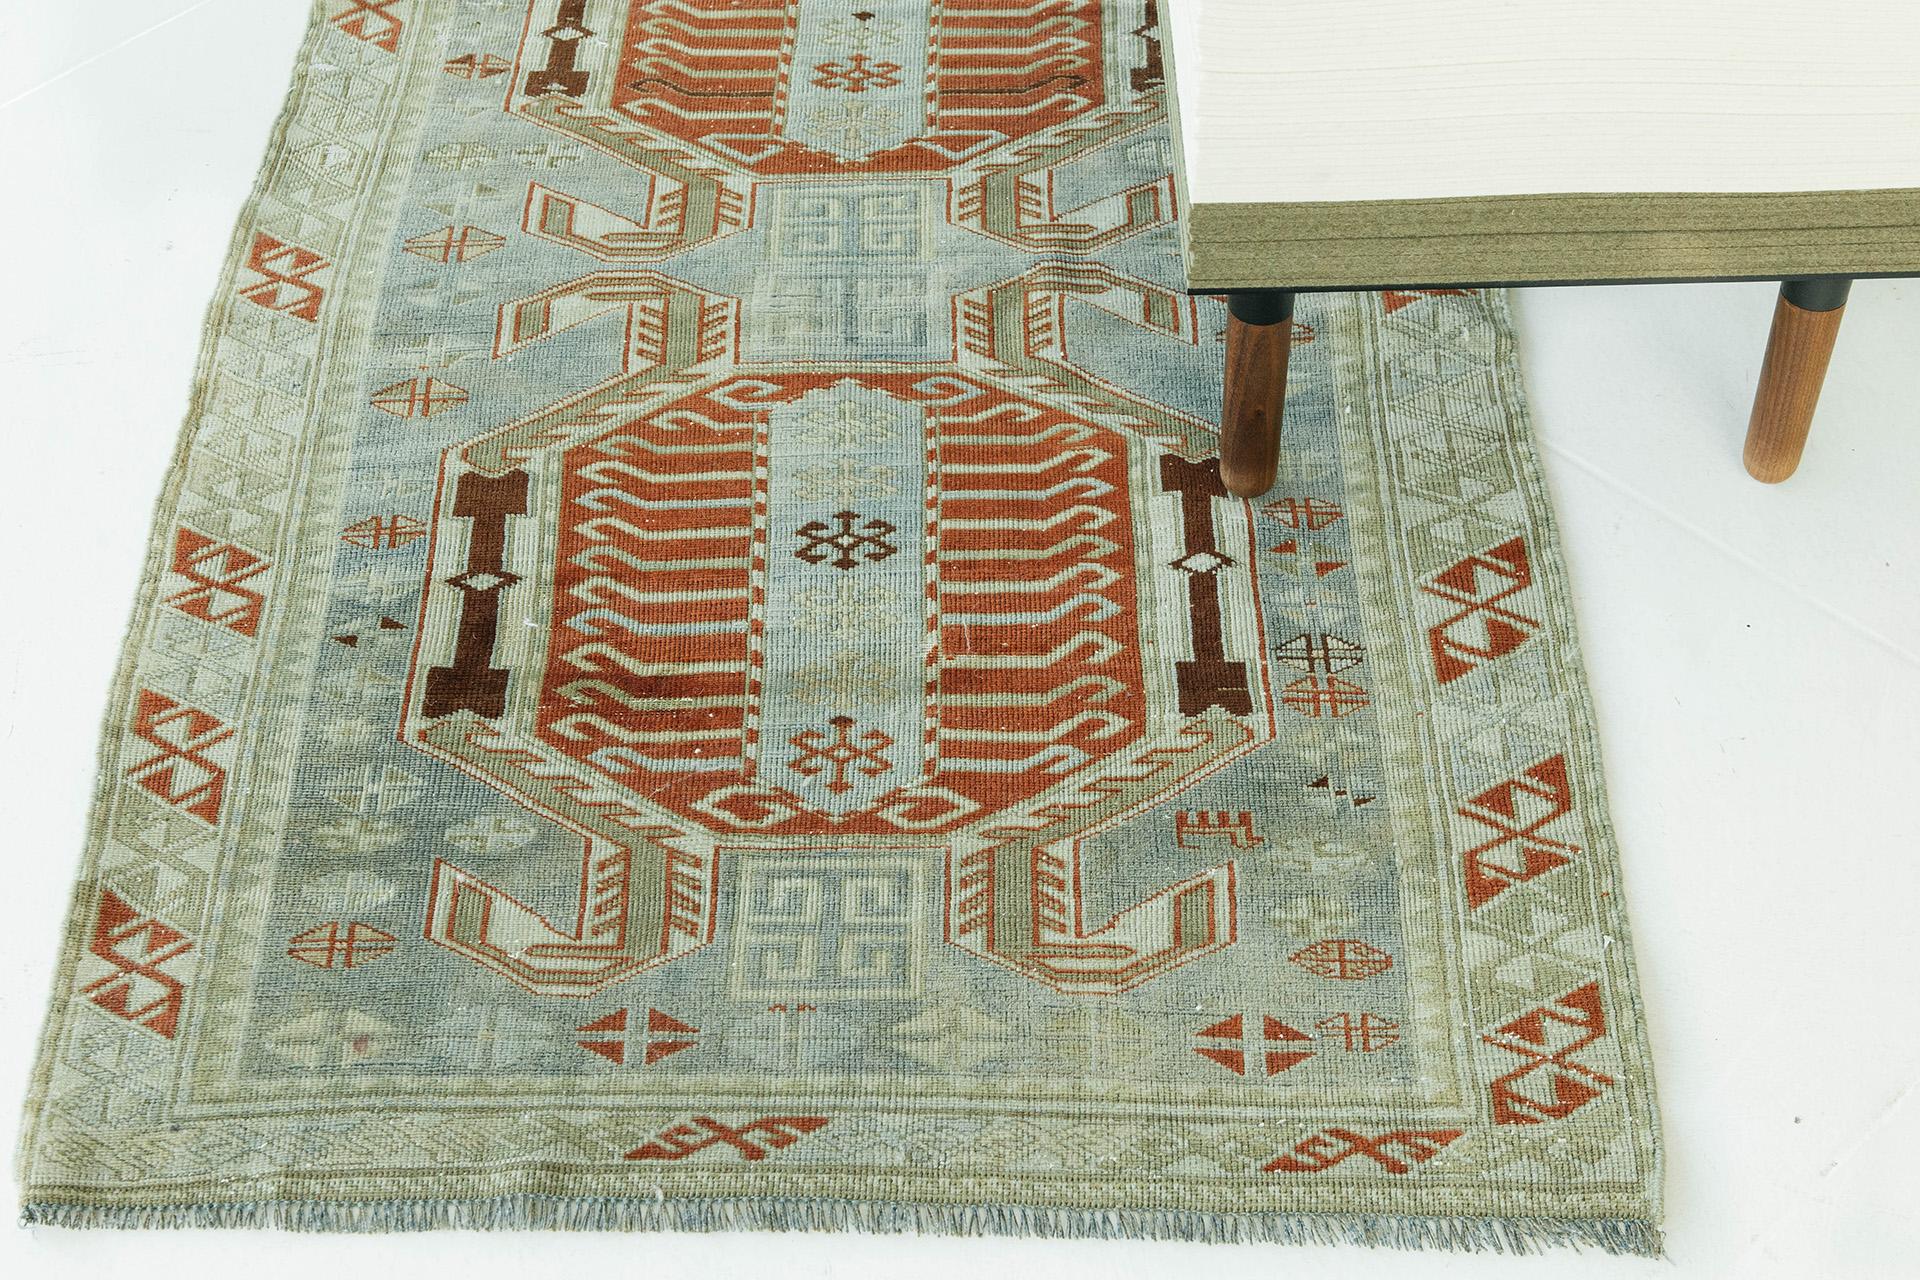 An abrash field of pale indigo and celadon, accented with brick red and deep brown, establishes an earthen palette in this tribal Caucasian piece. Features of its striking axial design include characteristic Lenkoran hooked medallions, archaic